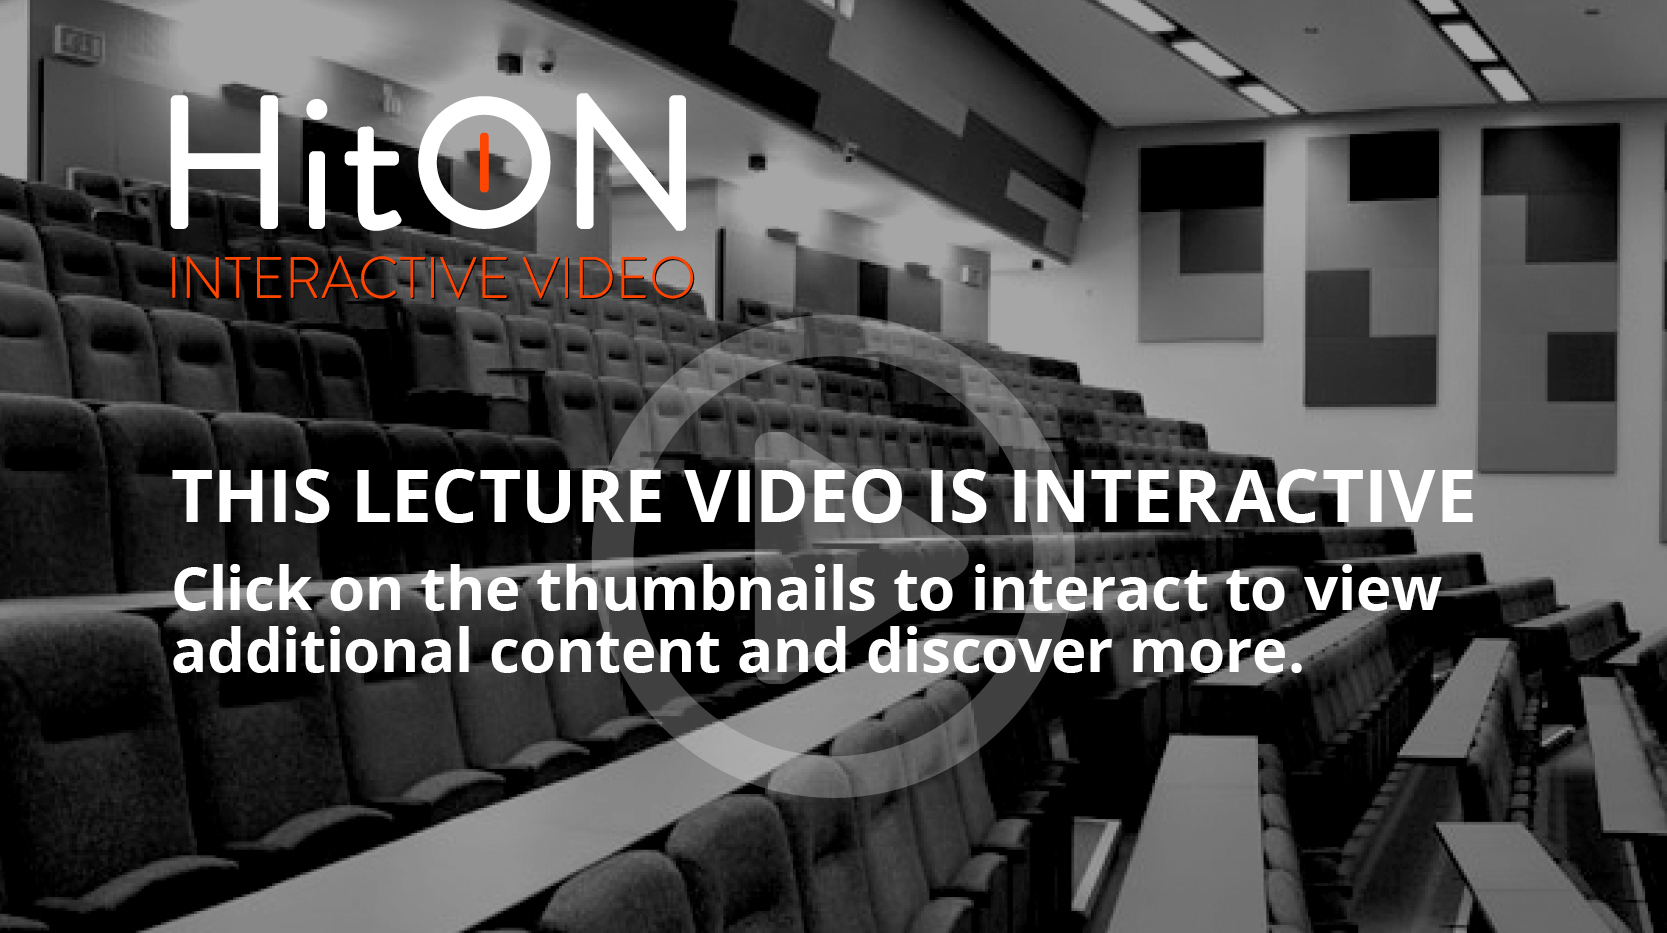 Click on the image above to watch the Interactive Lecture Video featuring Dr Brian Cox.